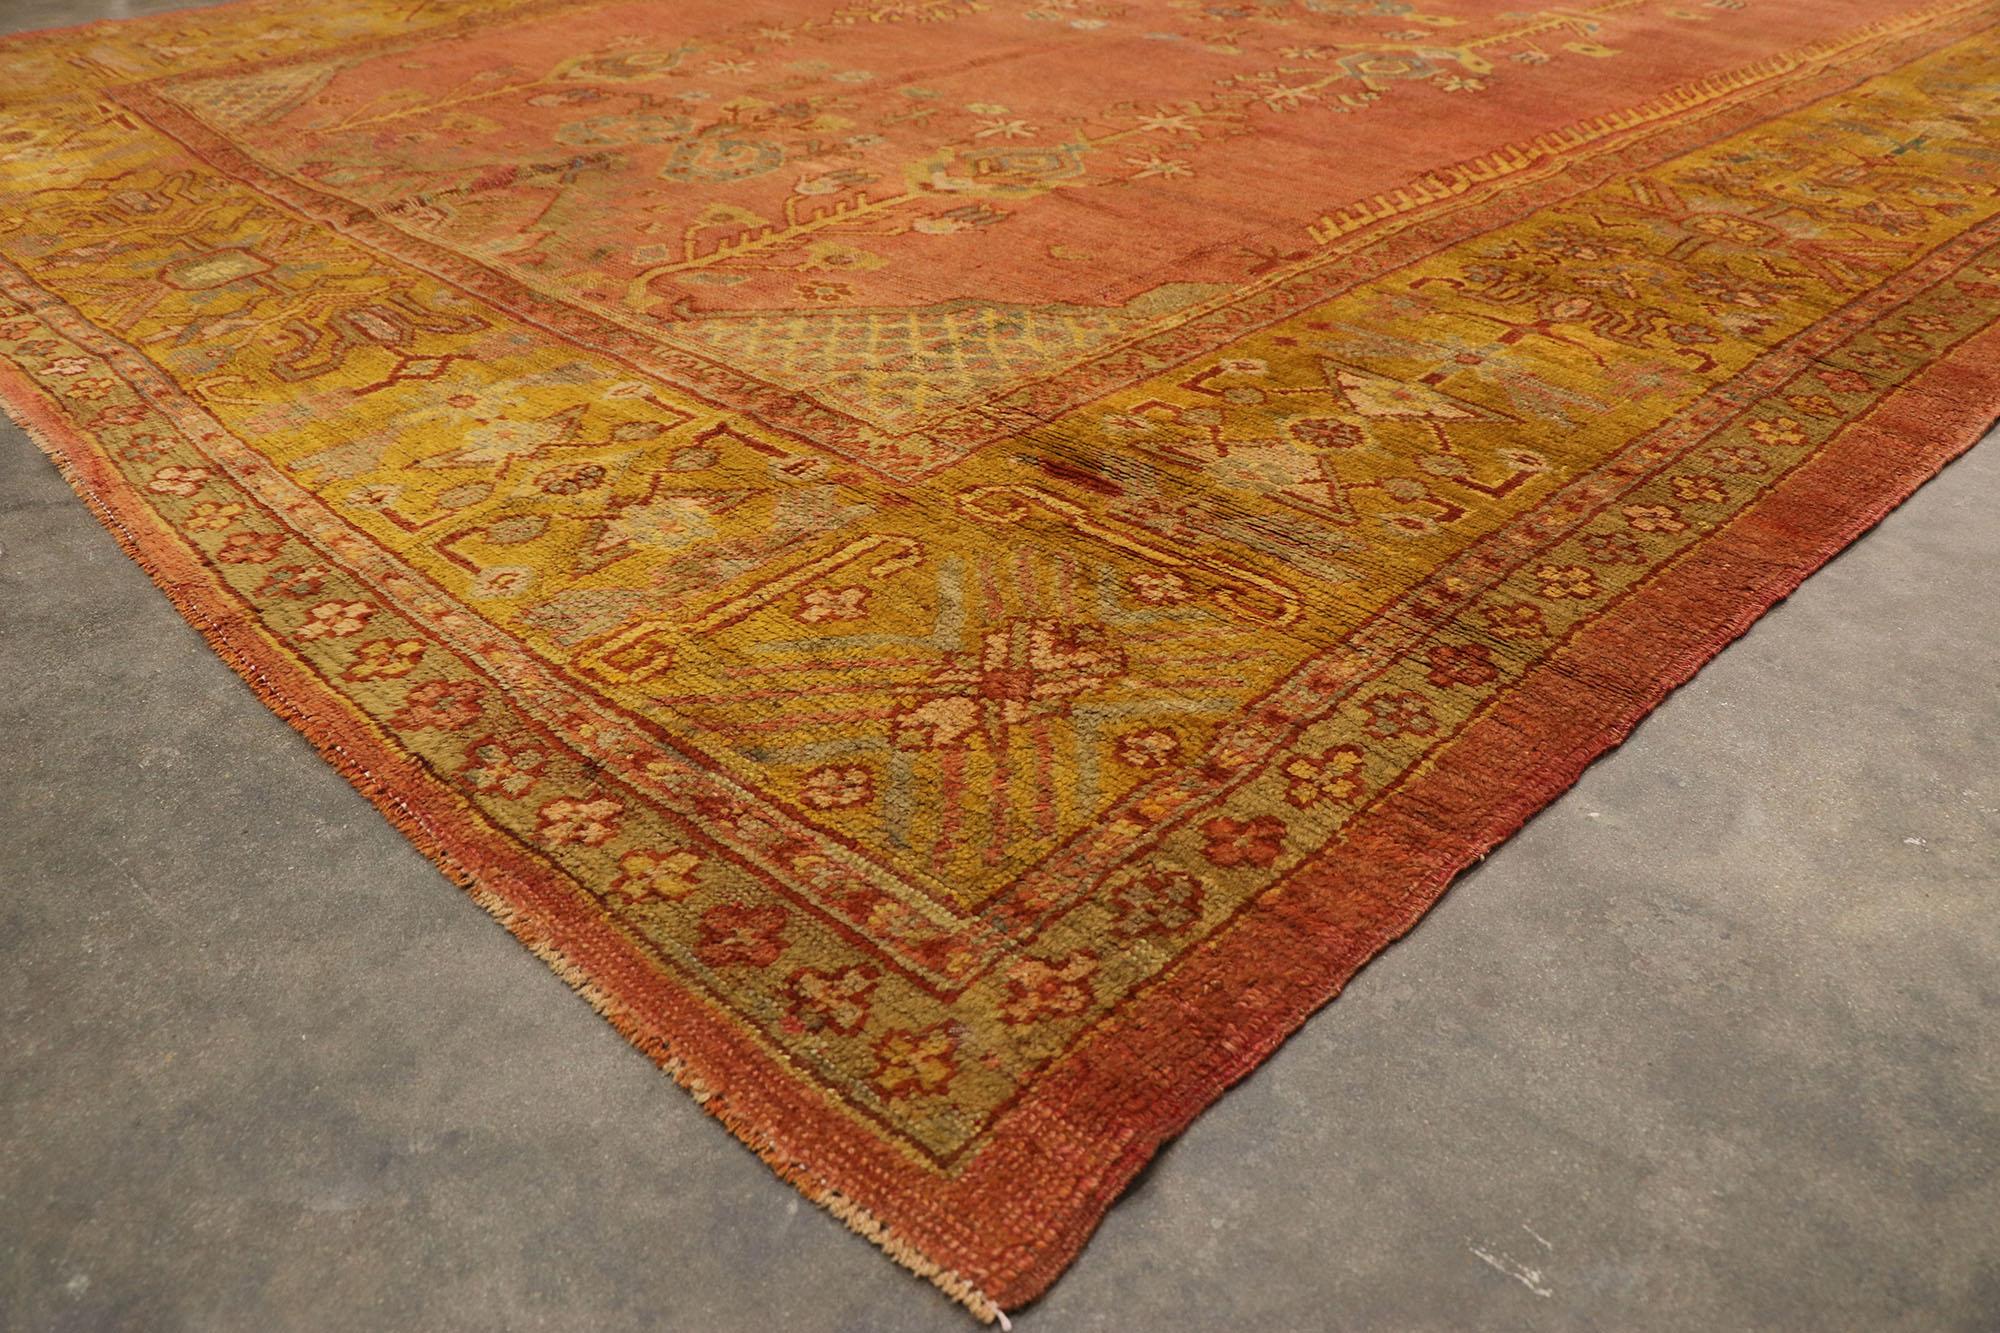 Wool Antique Turkish Oushak Rug with Rustic Arts & Crafts Style For Sale